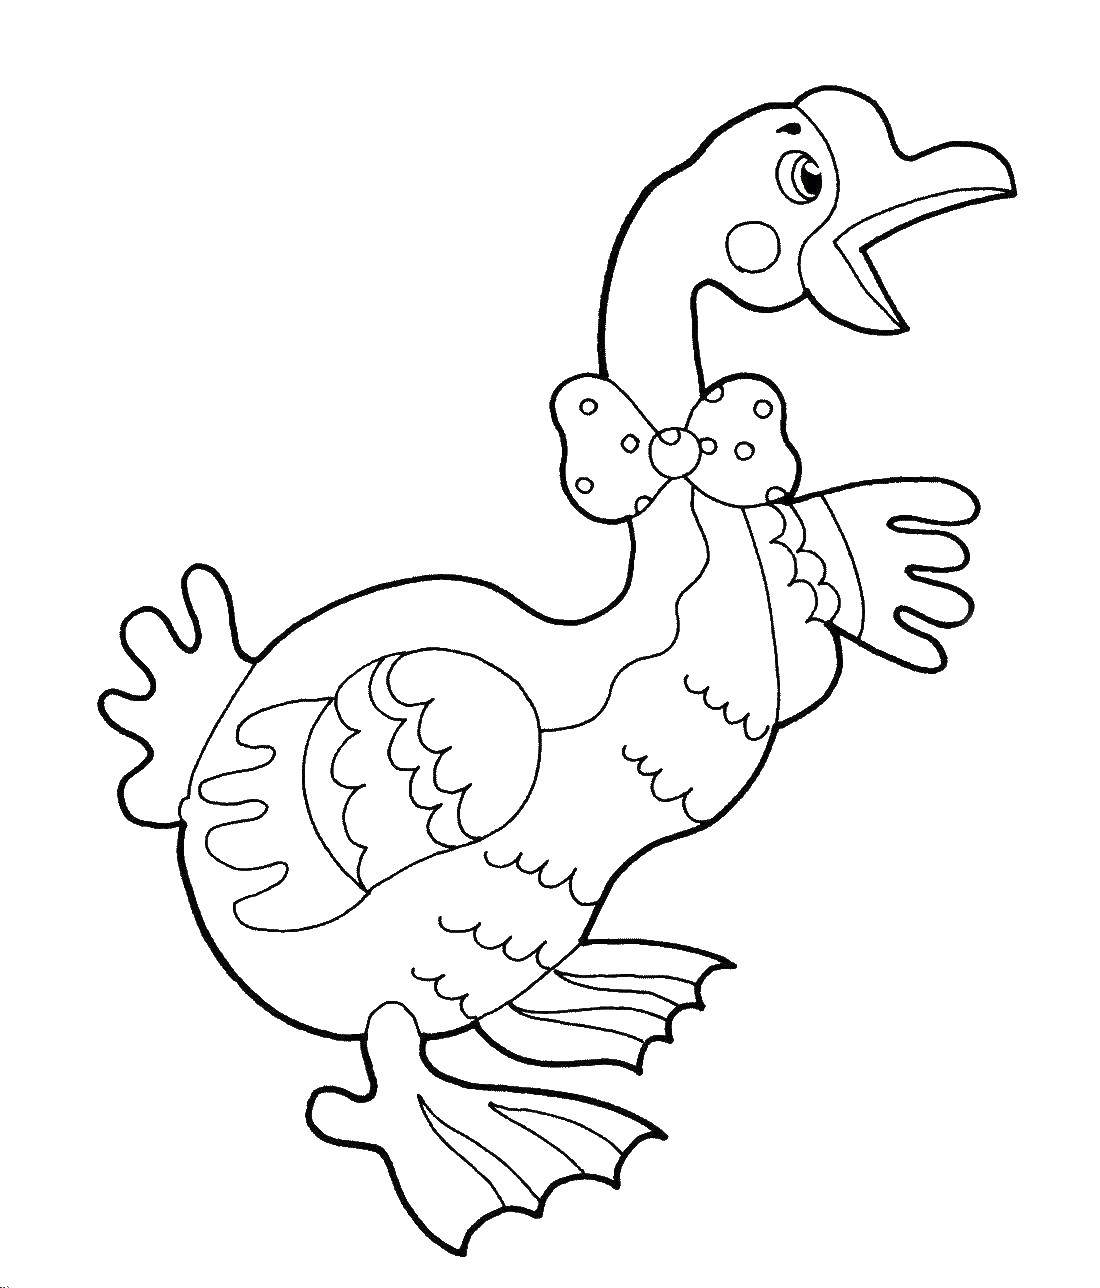 Coloring Goose with bow. Category bows. Tags:  Bow, bow.